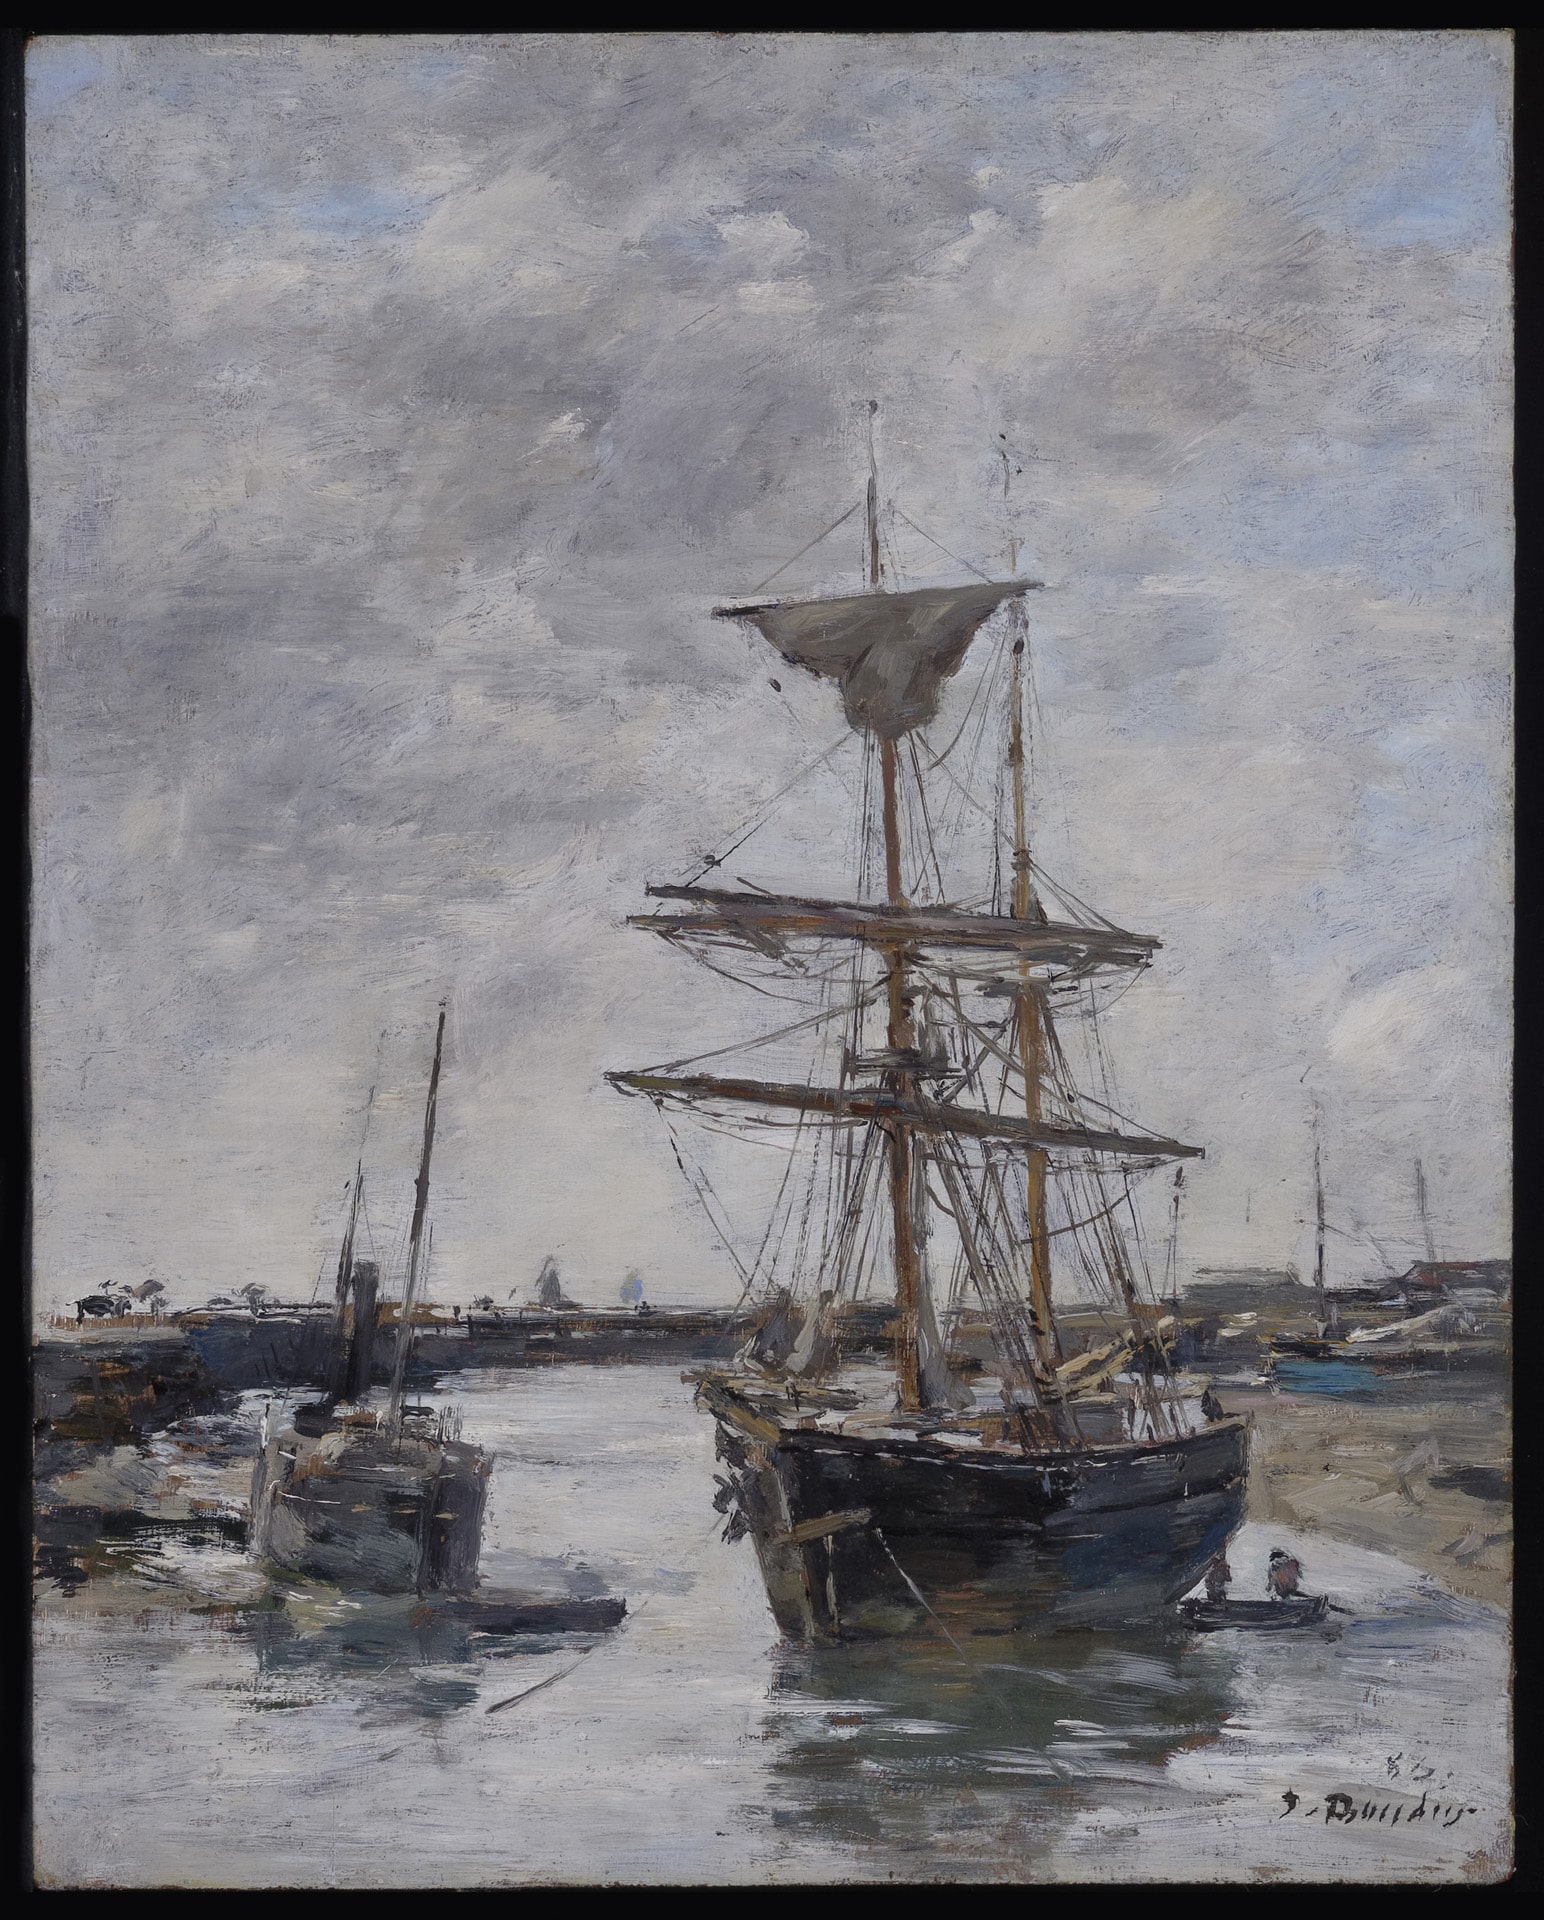 a seascape with two boats, the one on the right has a tall mast. both are docked